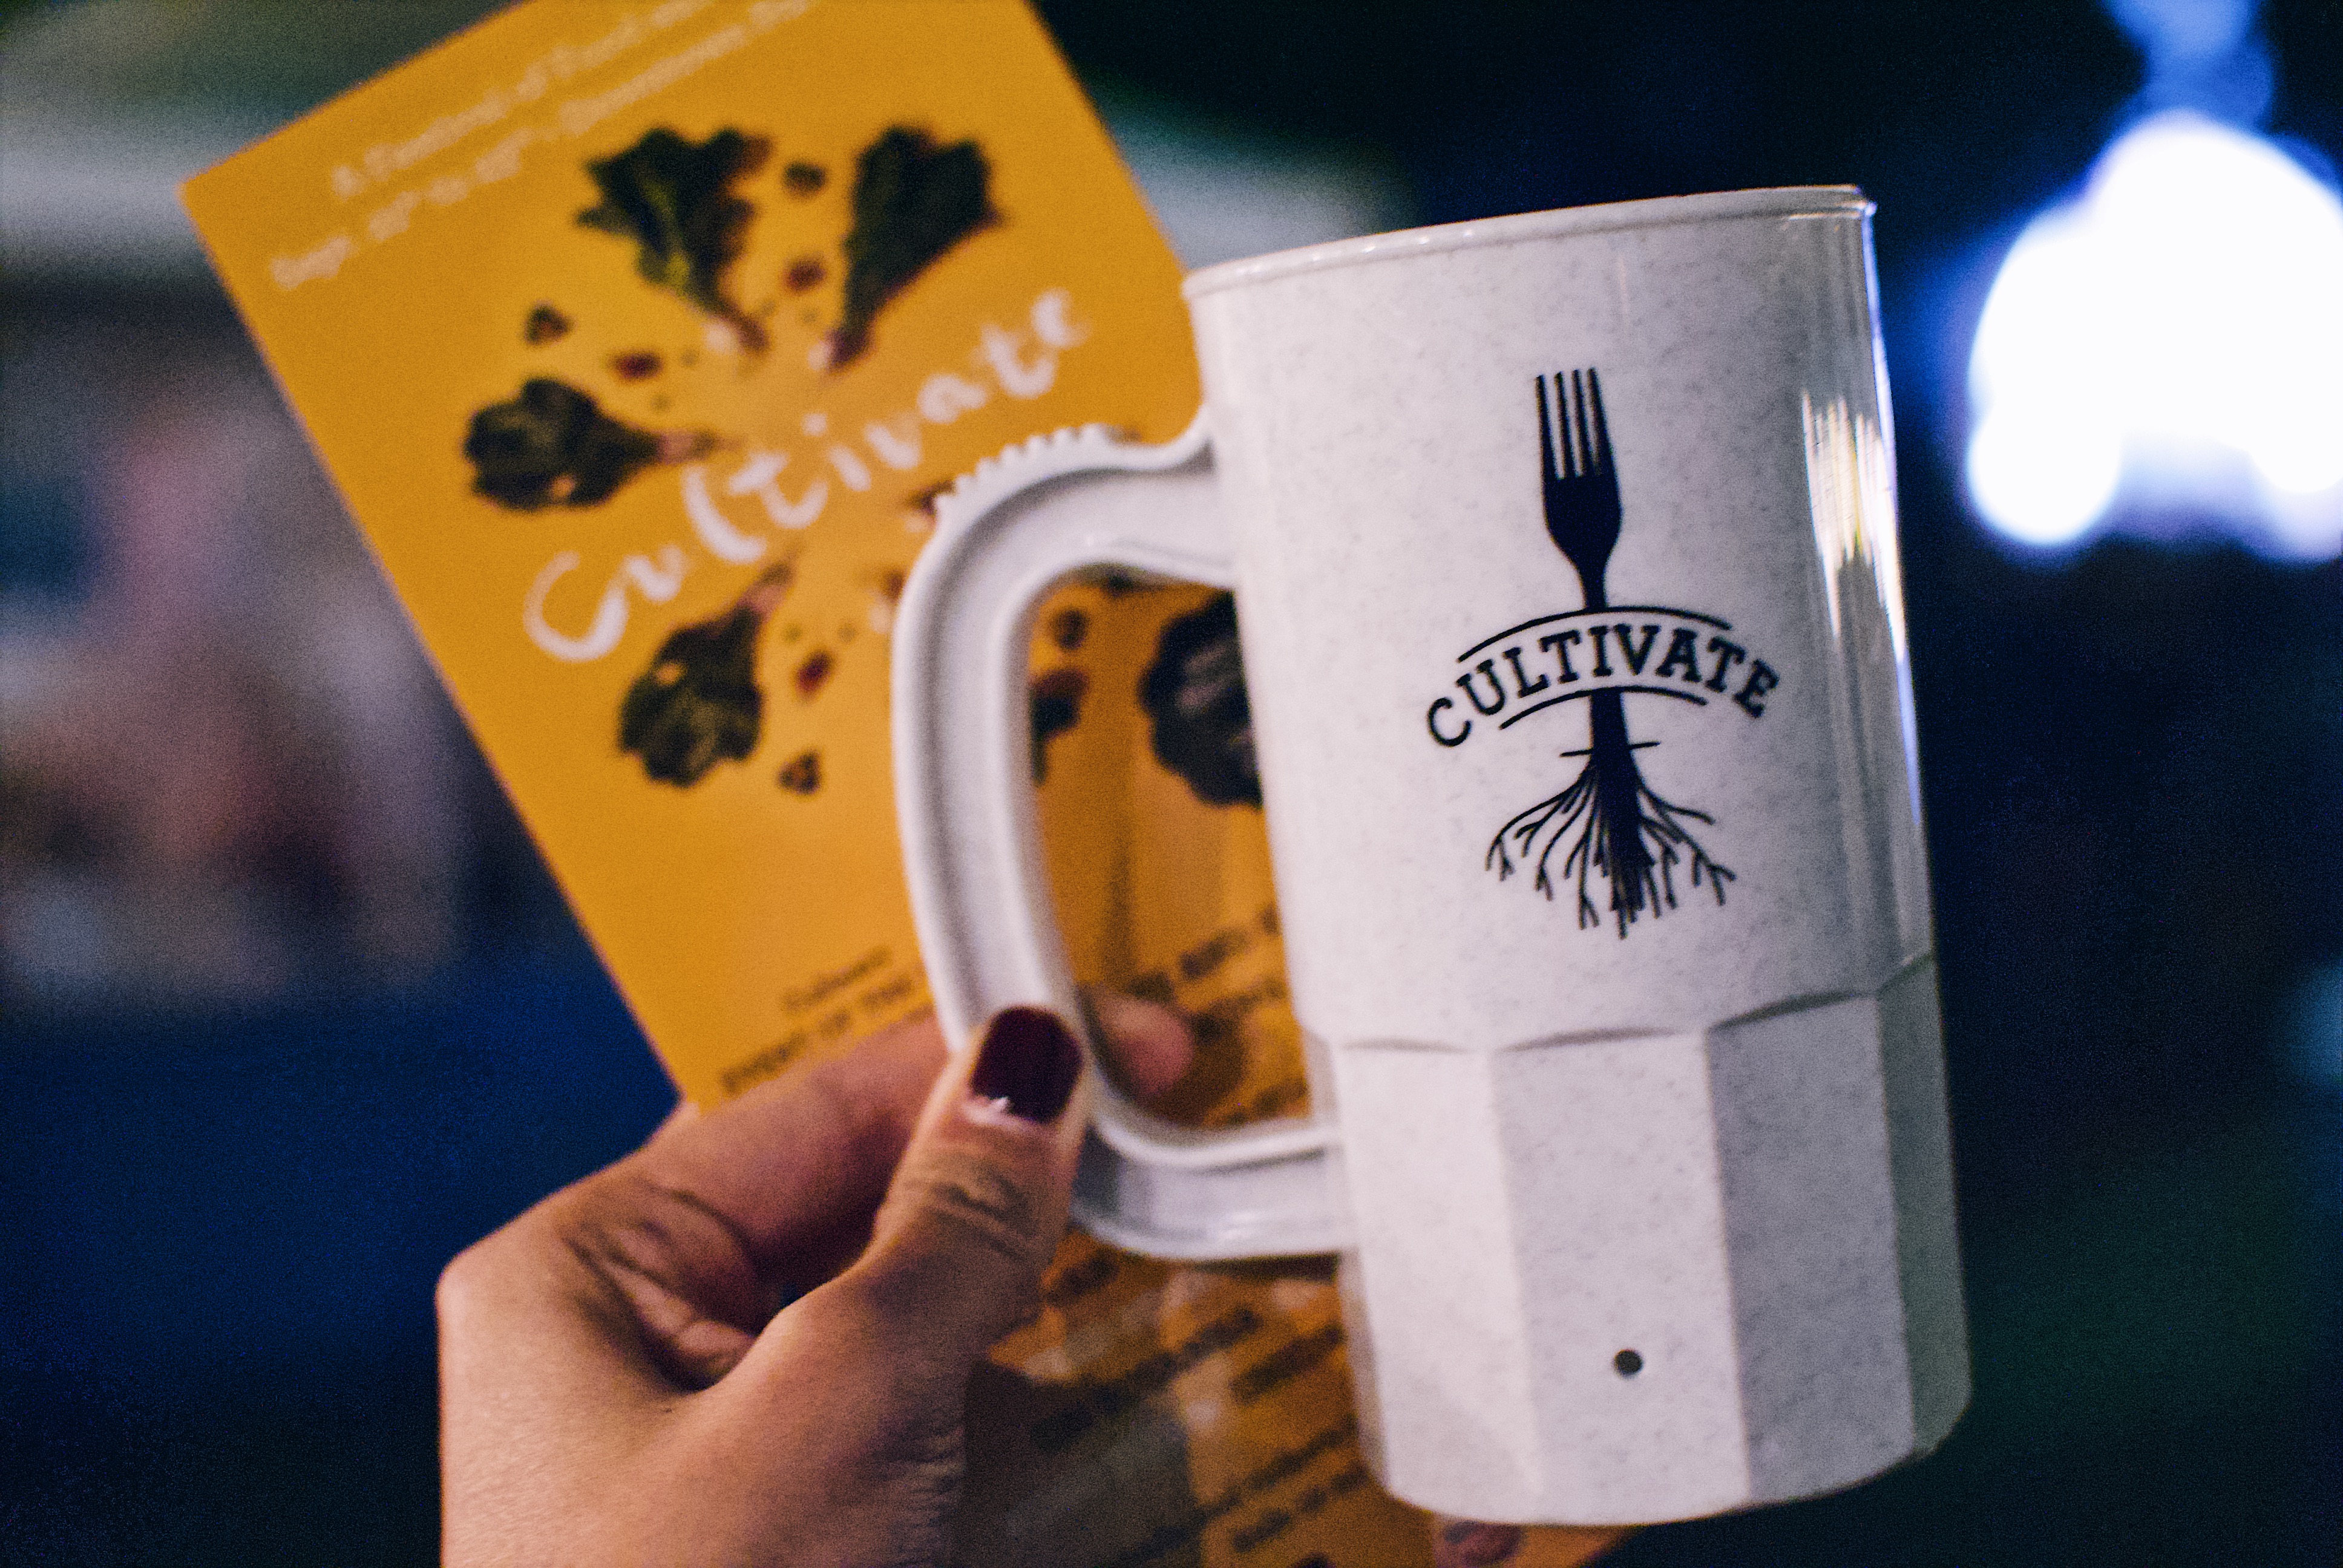 Cultivate tickets and mug